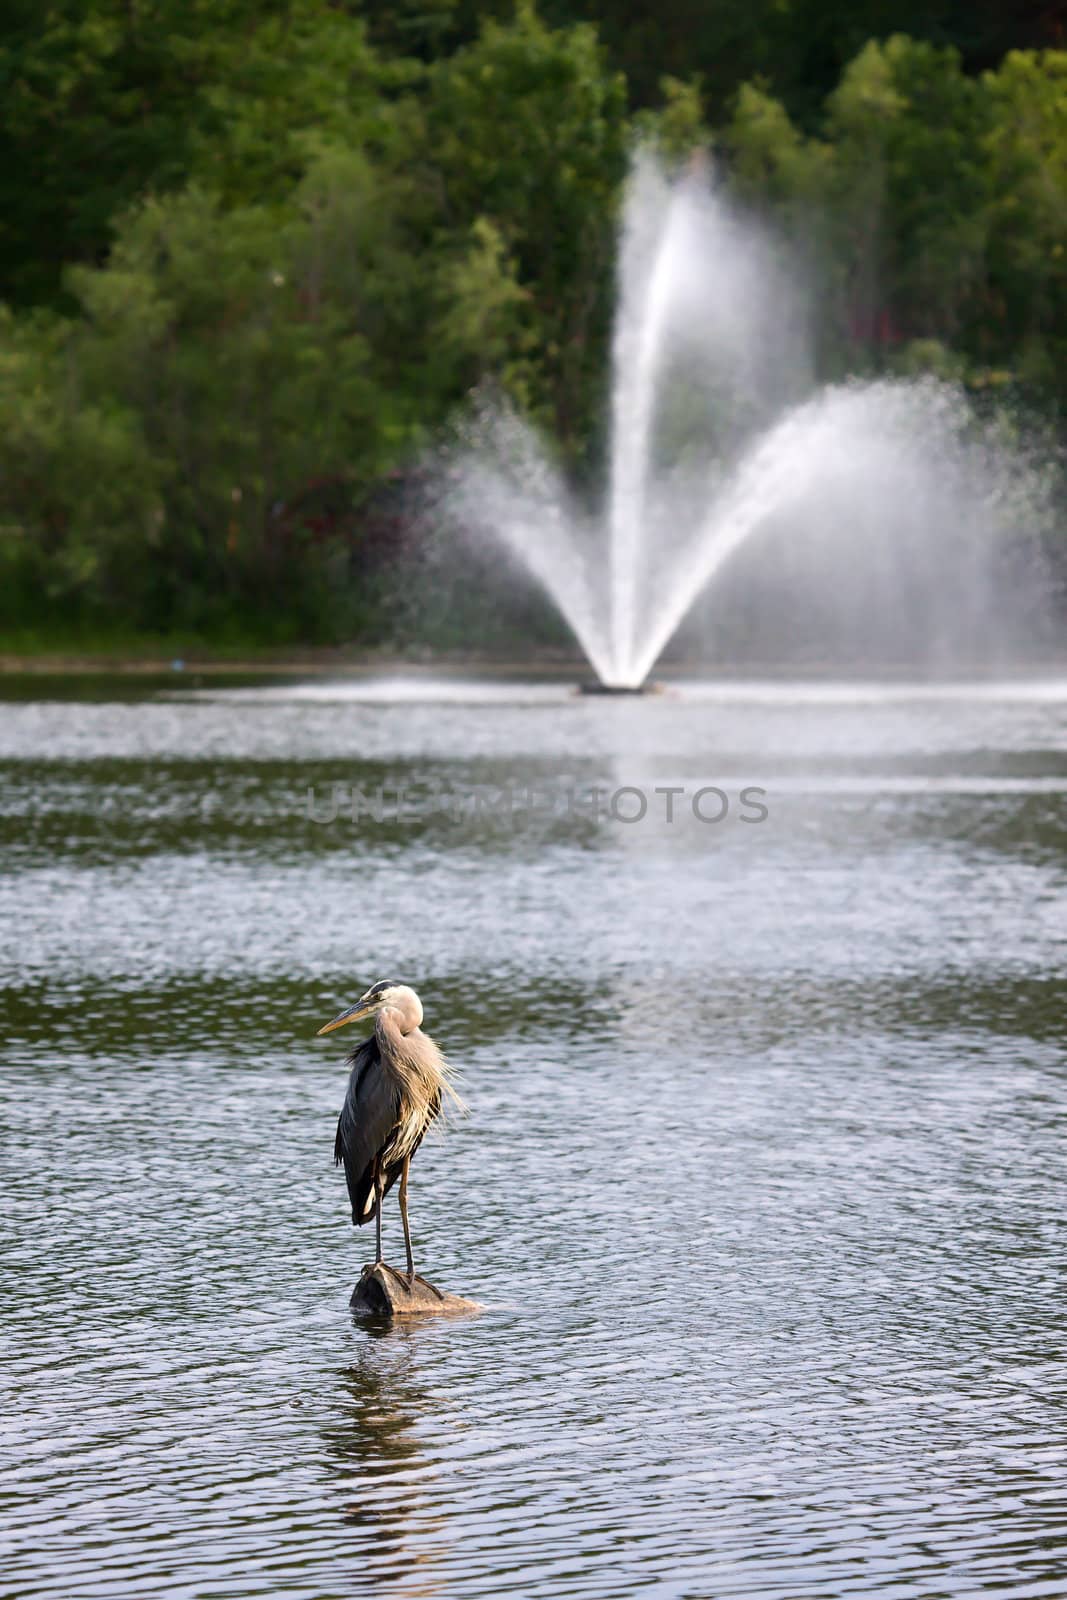 Great Blue Heron by Coffee999